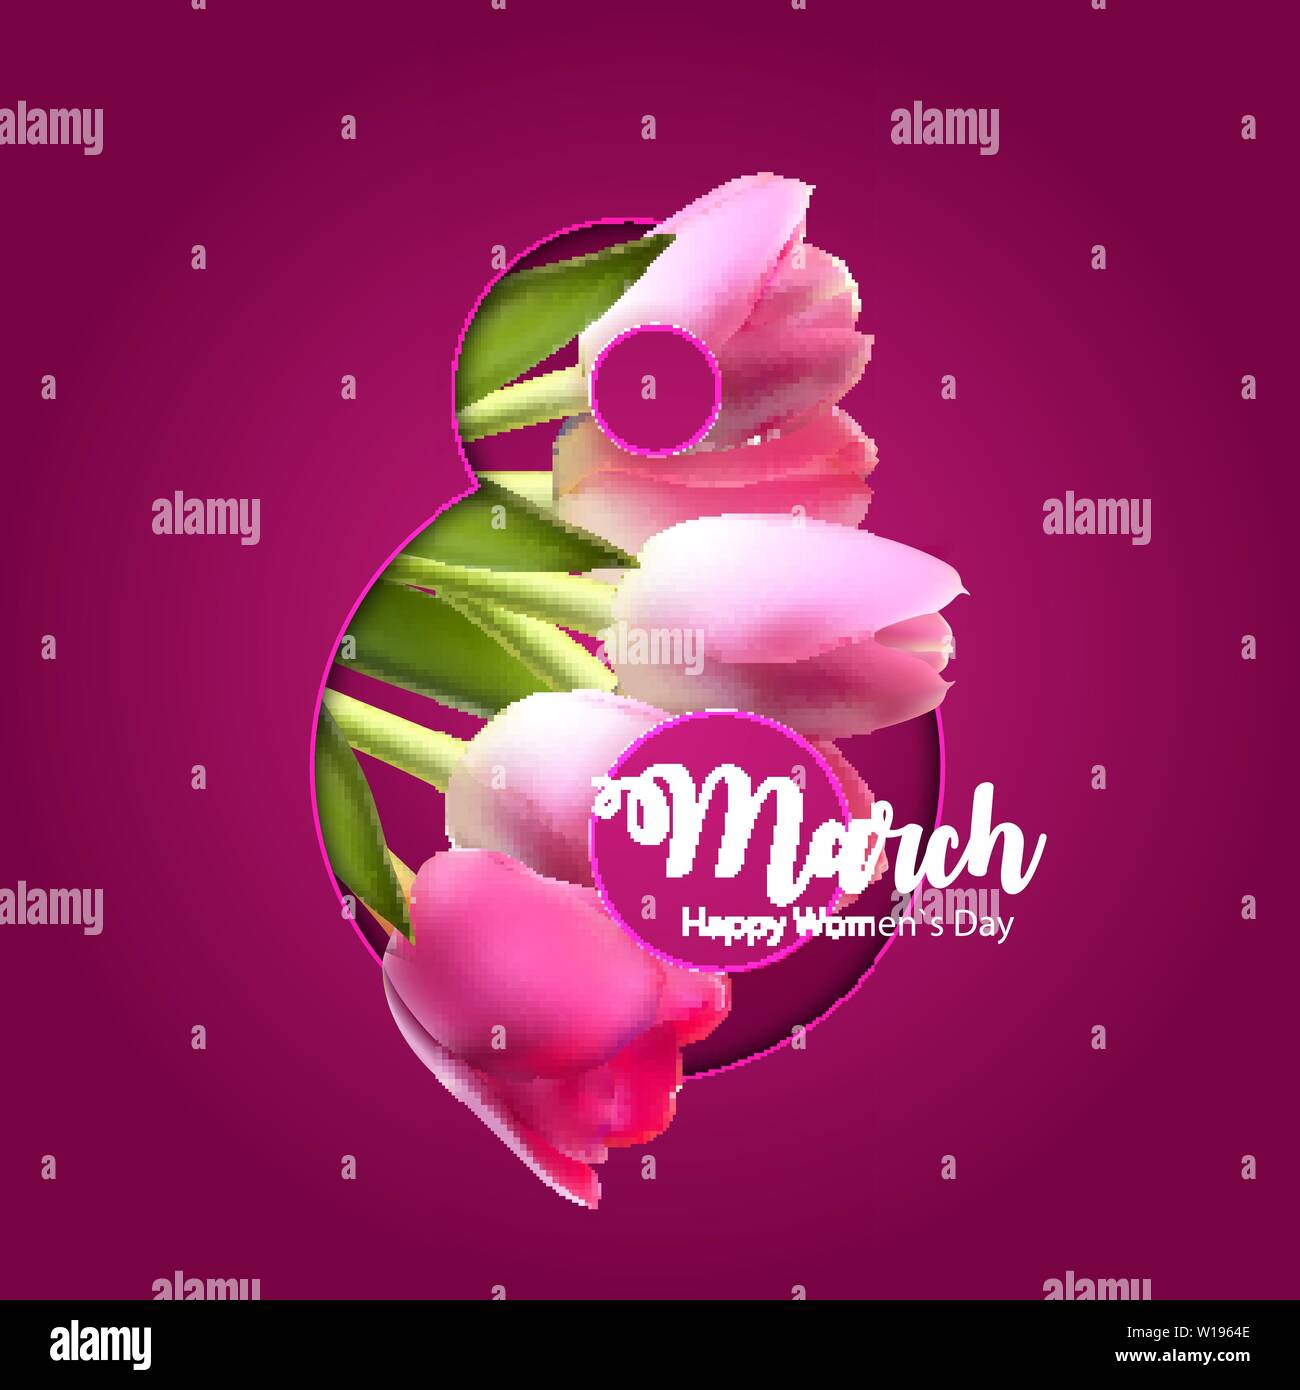 Poster International Happy Women's Day 8 March Floral Greeting card Vector Illustration Stock Vector